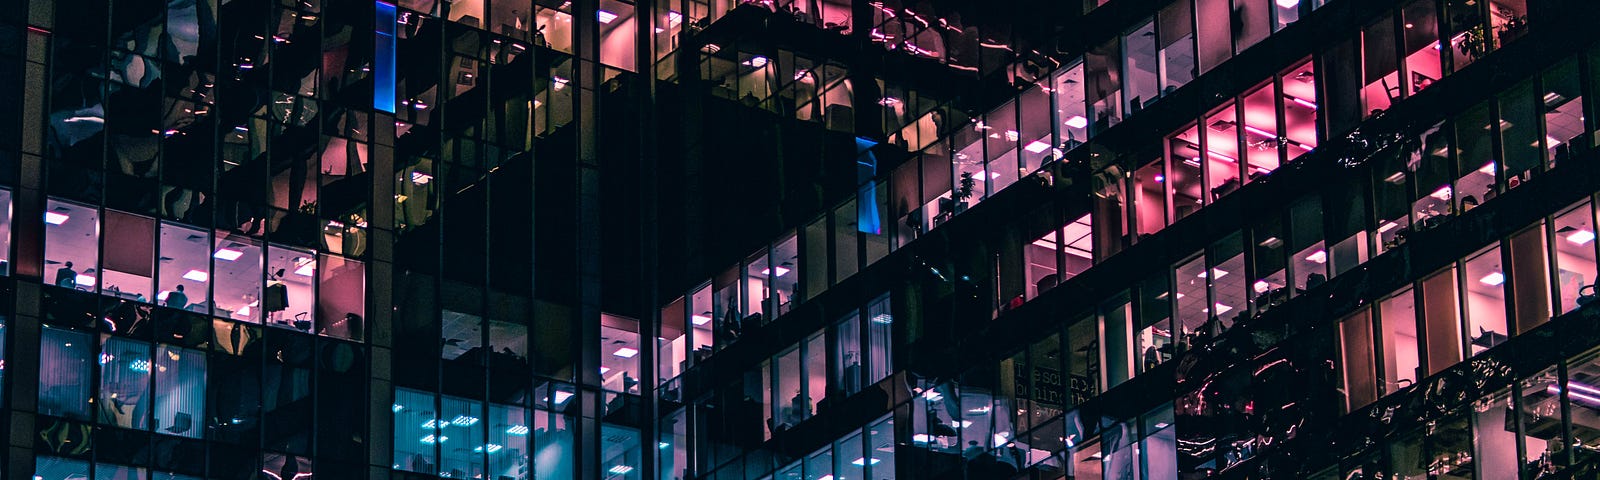 An office building at night with workers in their cubicles